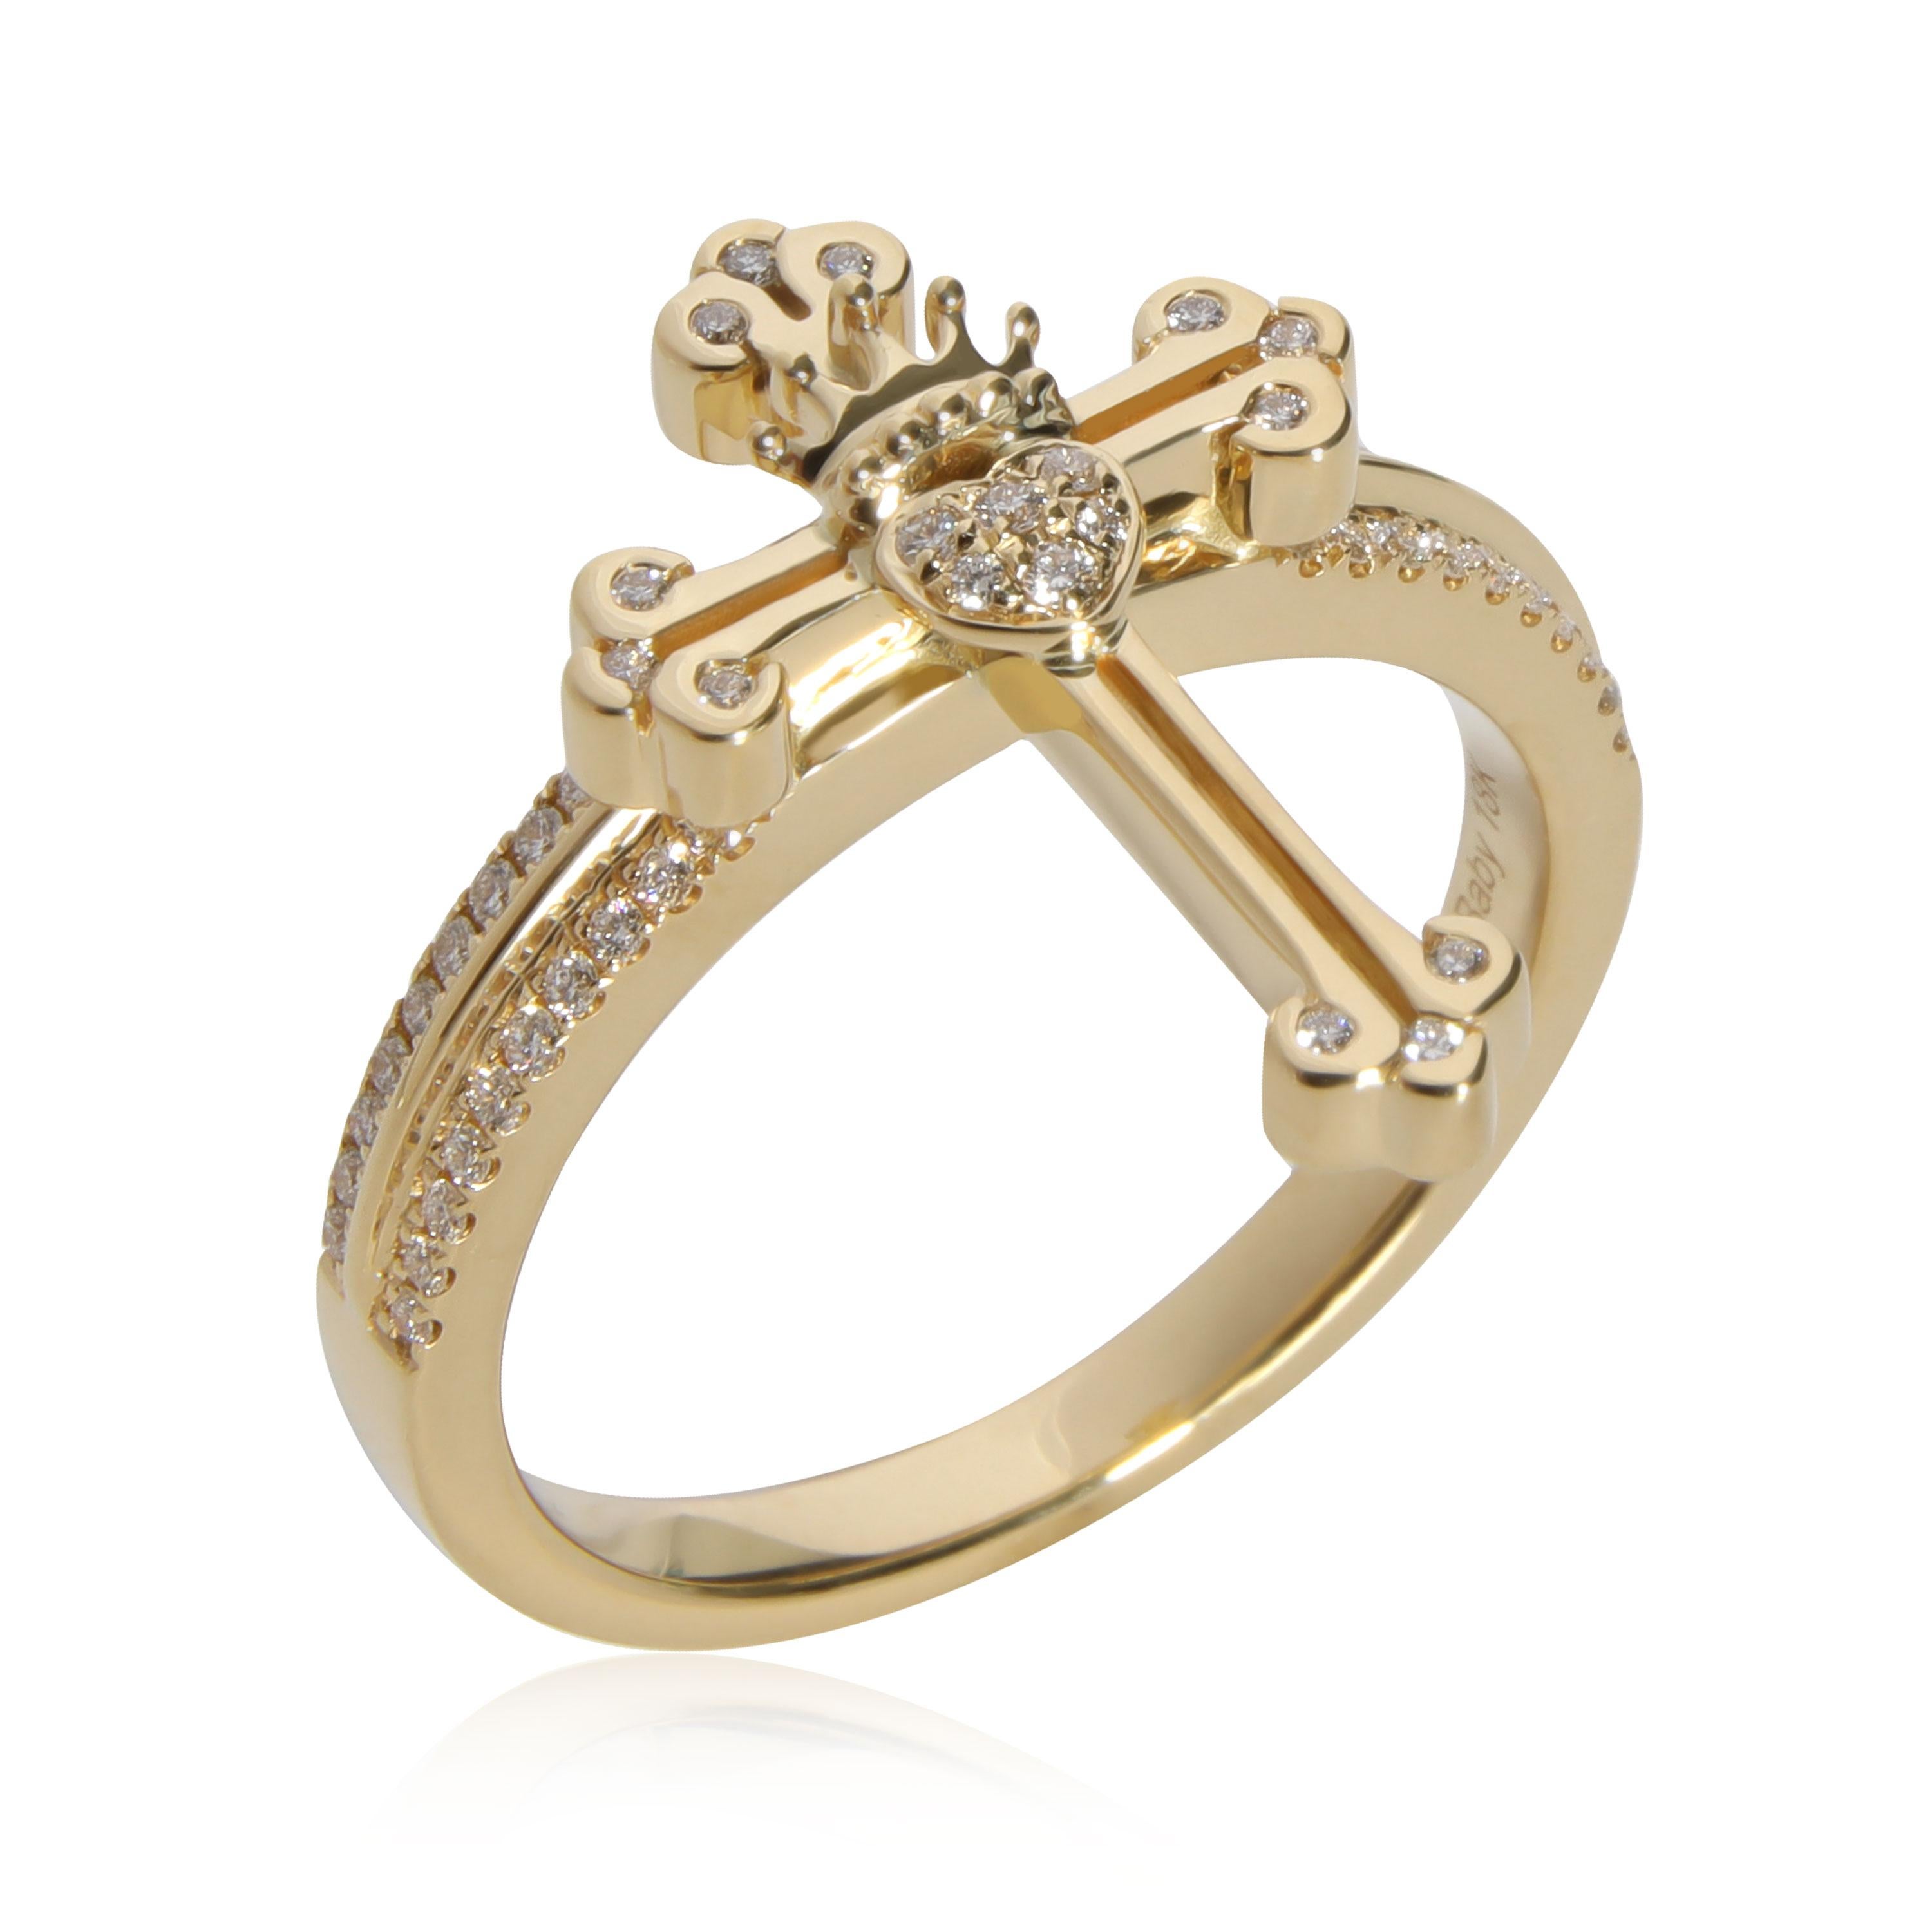 King Baby Diamond Cross & Crowned Heart Ring in 18K Yellow Gold

PRIMARY DETAILS
SKU: 111658
Listing Title: King Baby Diamond Cross & Crowned Heart Ring in 18K Yellow Gold
Condition Description: Retails for 3030 USD. In excellent condition and